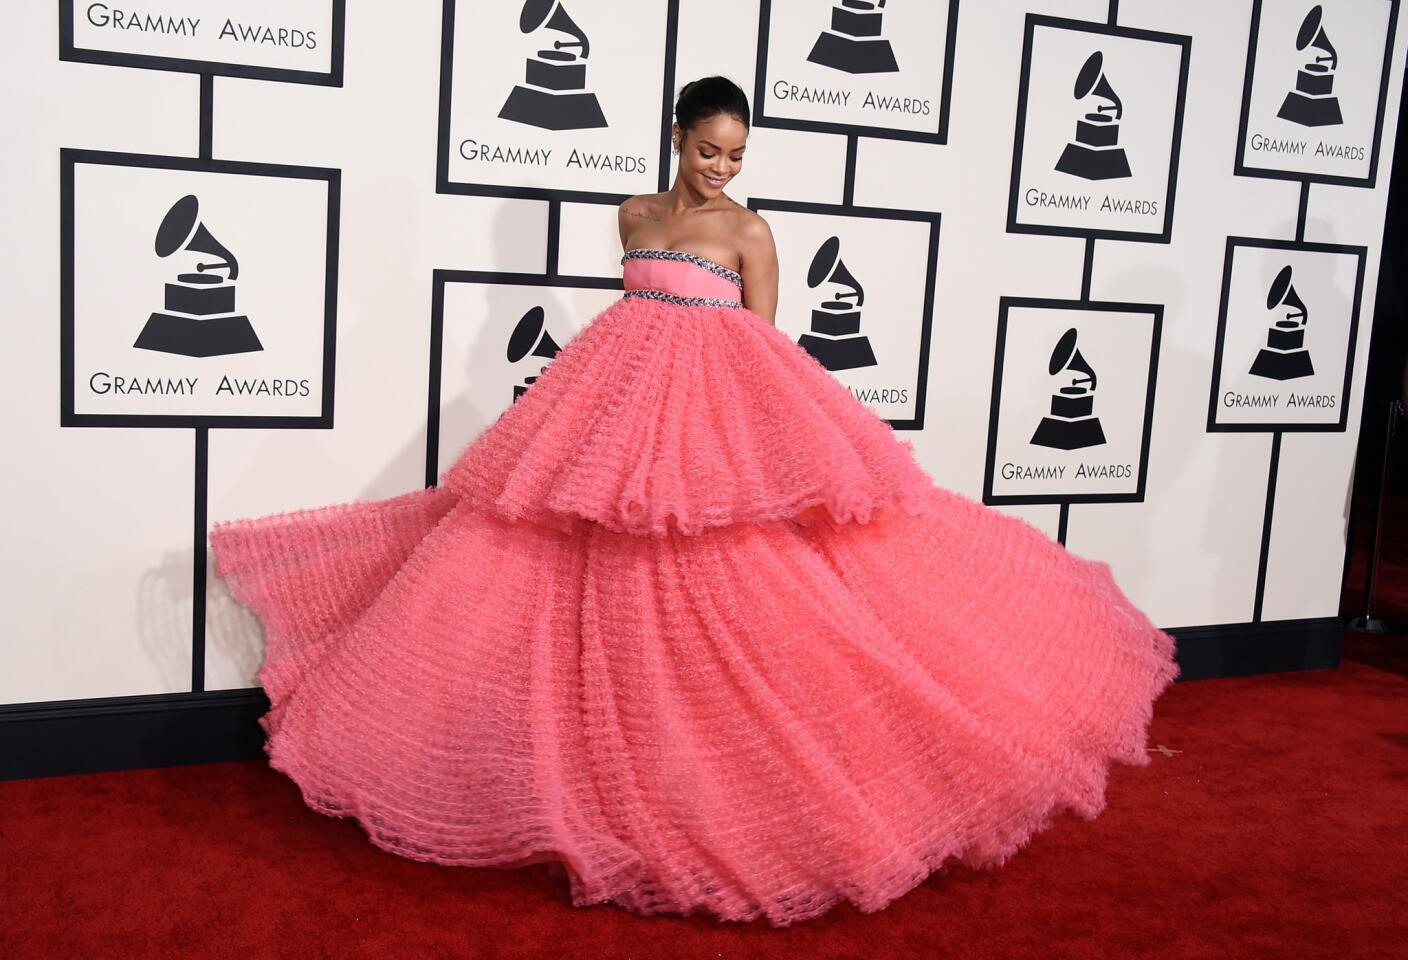 Rihanna arrives at the Grammys in an Empire waist bubble gown by Giambattista Valli. MORE: Show updates | Show highlights | Quotes | Red carpet